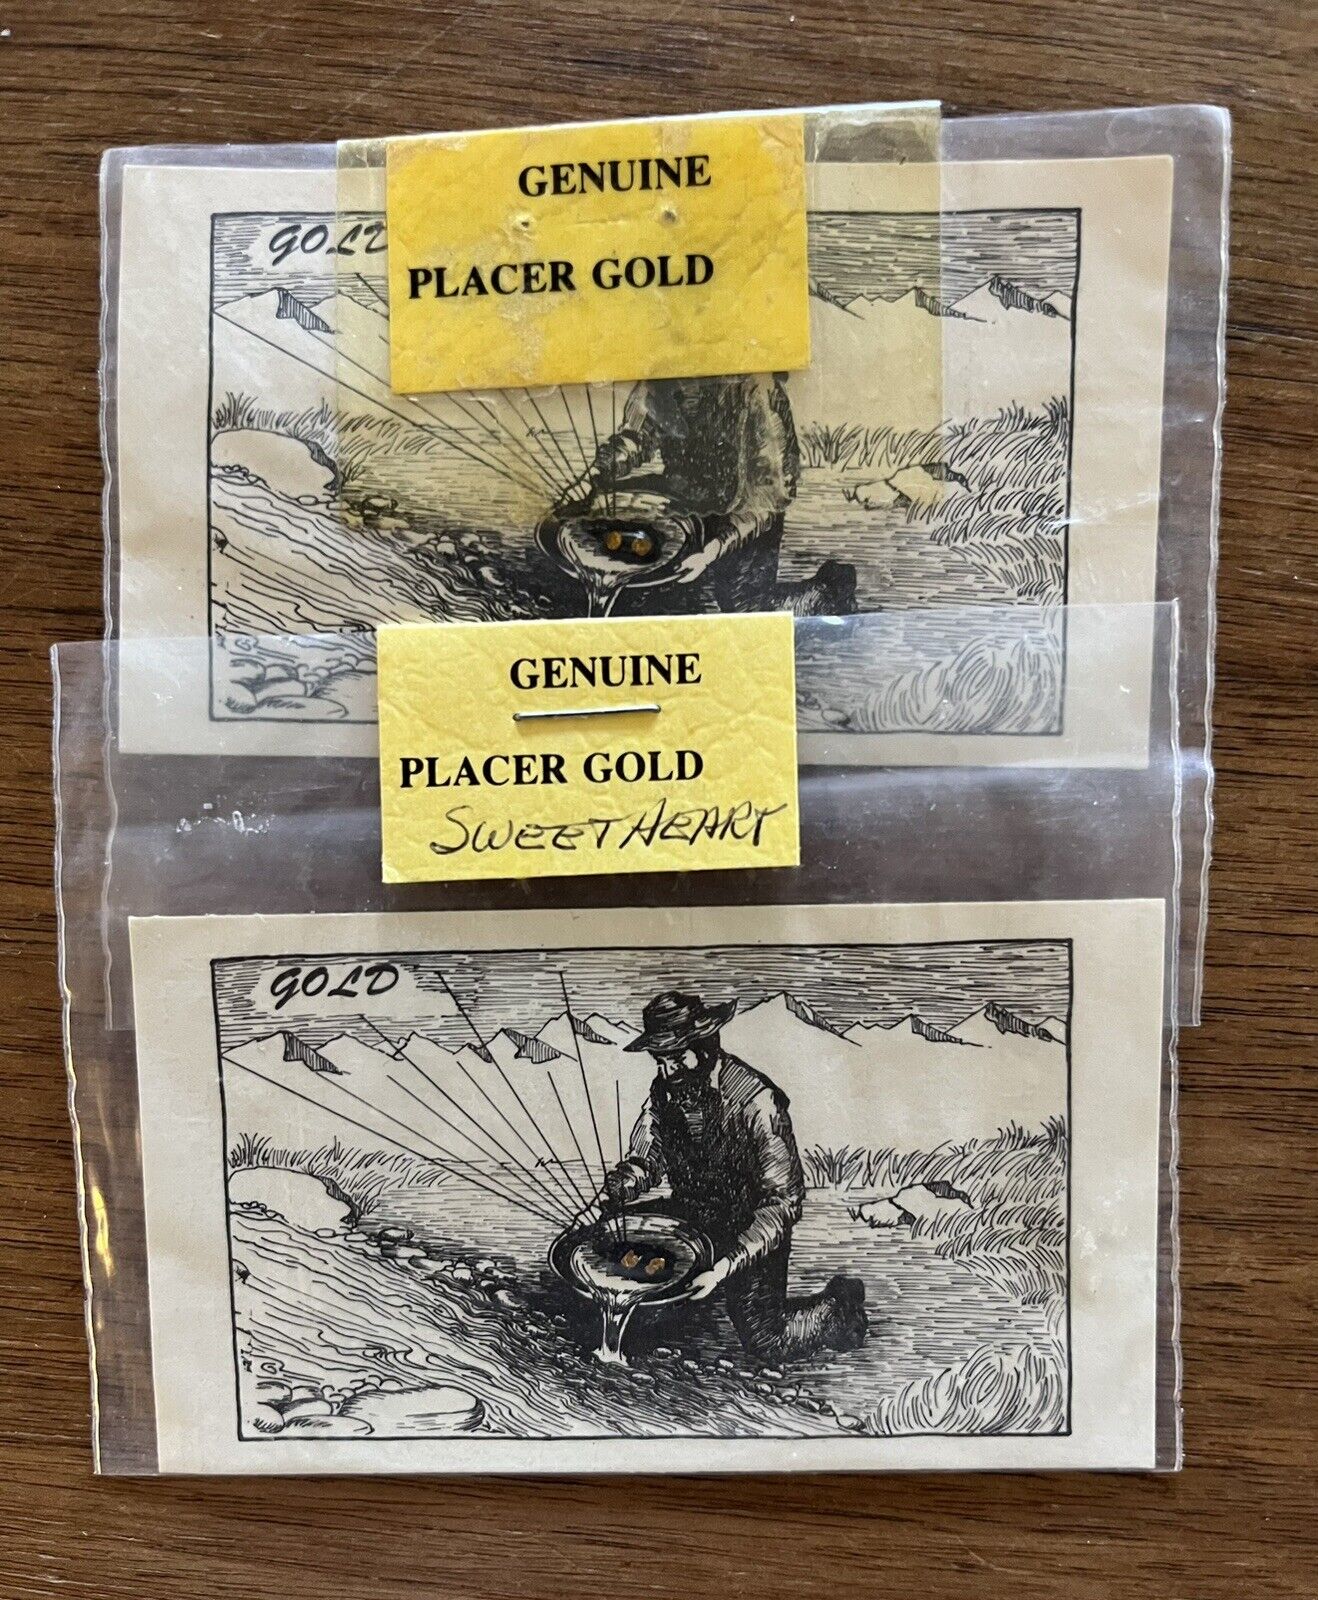 2 Genuine Hand Panned Placer Gold Flake Specimens on Cards Geodek, Inc. 1980